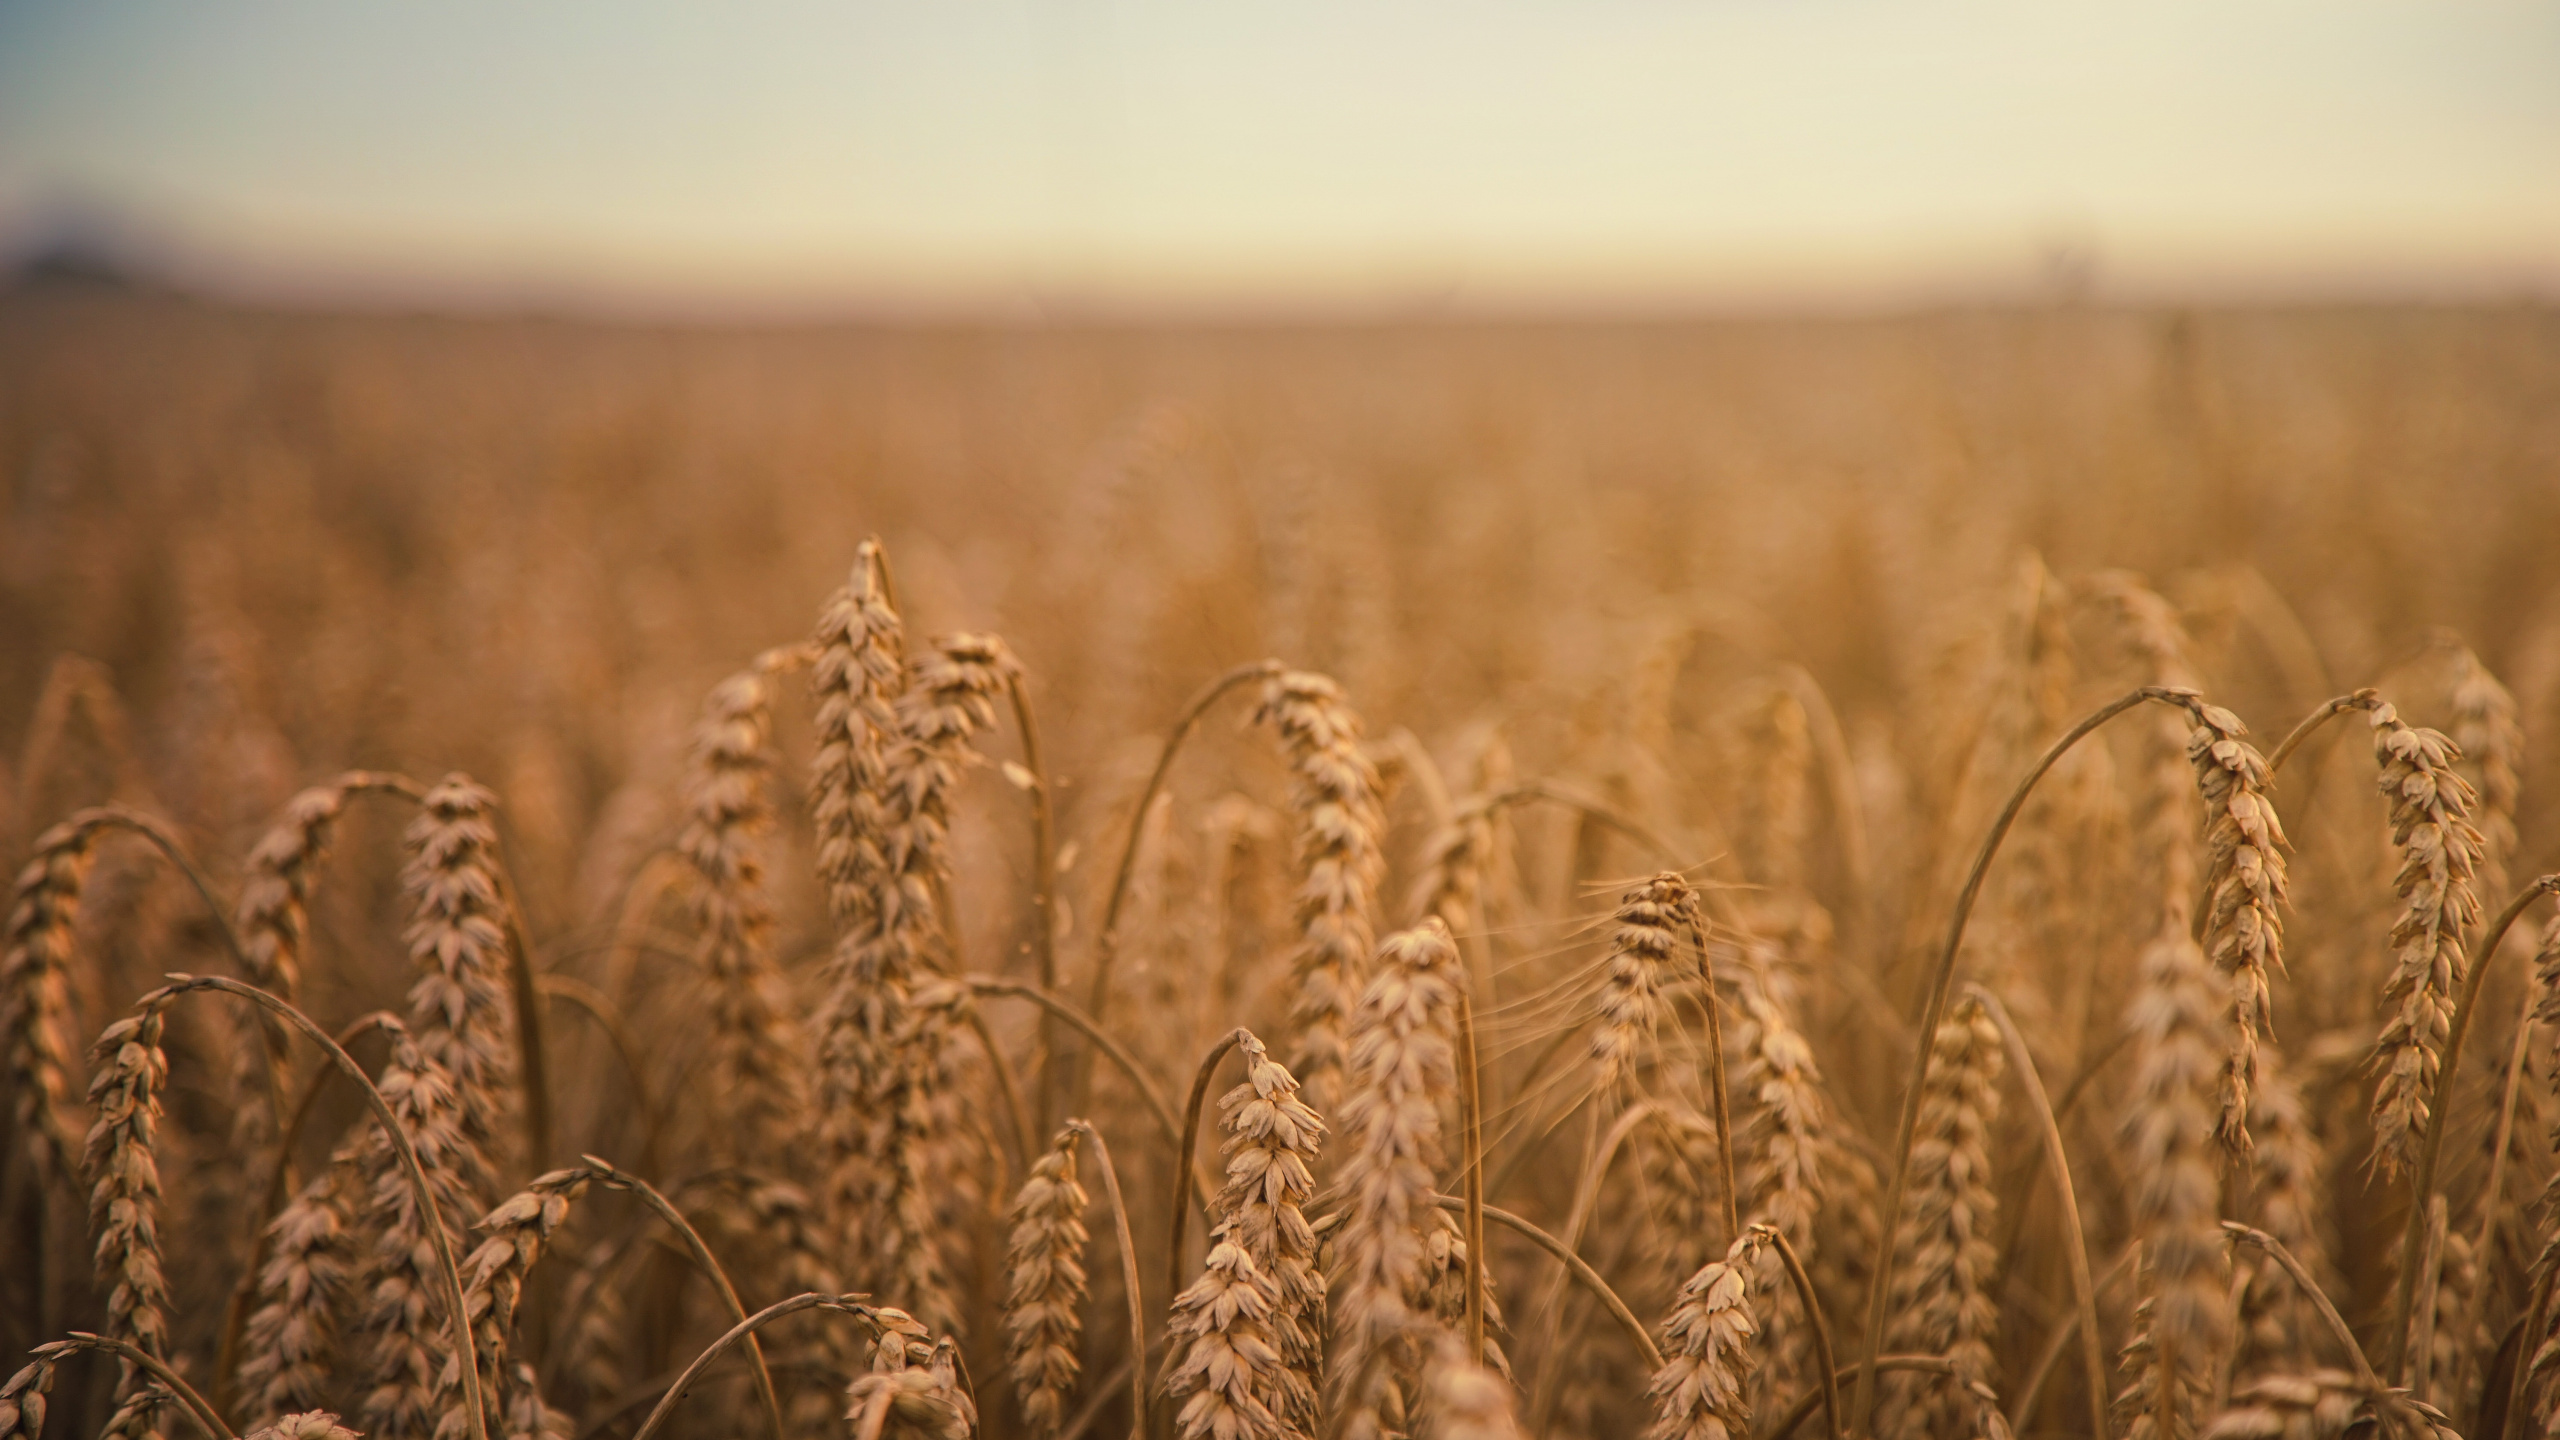 Brown Wheat Field During Daytime. Wallpaper in 2560x1440 Resolution